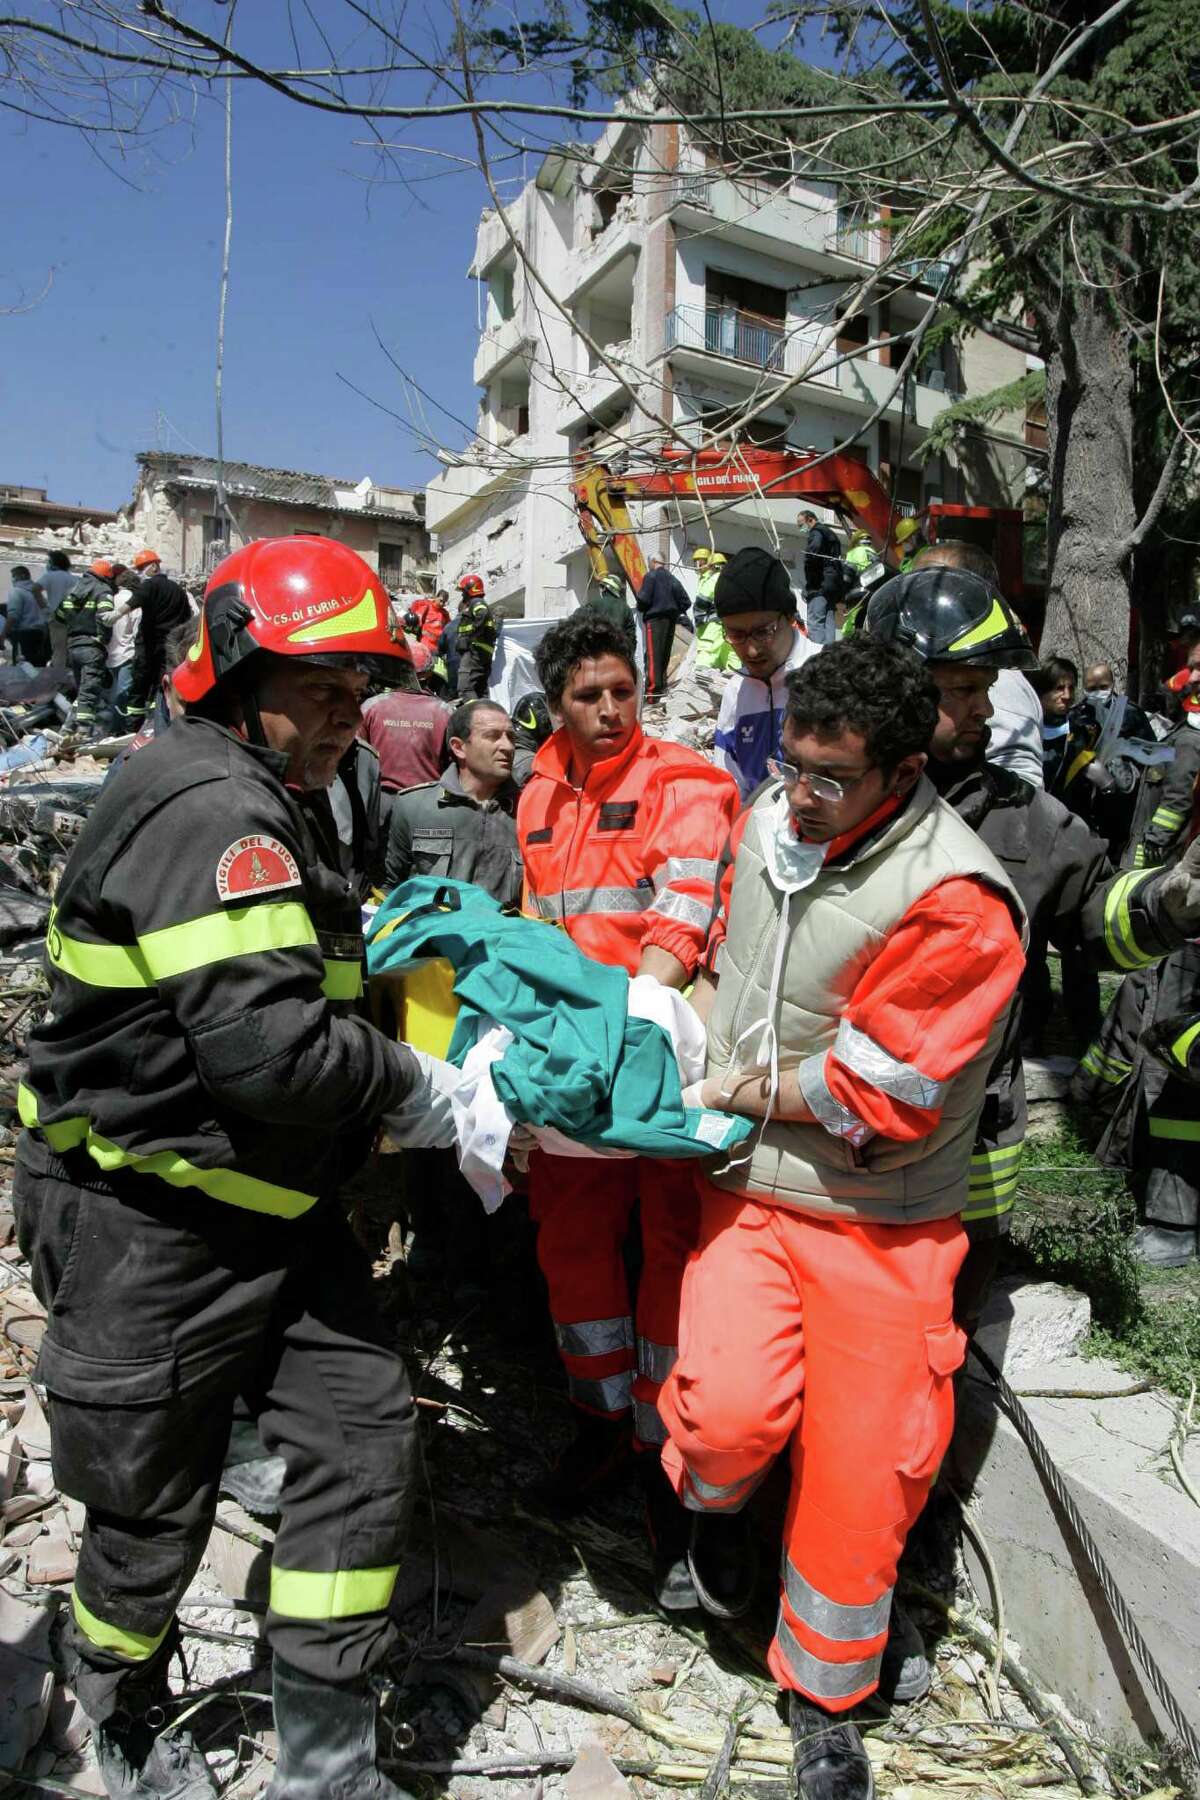 FILE - In this April 6, 2009 file photo Alfredo Gianmaria is carried away by rescuers after a four-storey building collapsed following a earthquake in L'Aquila, central Italy. An Italian court Monday, Oct. 22, 2012 has convicted seven scientists and experts of manslaughter for failing to adequately warn citizens before an earthquake struck central Italy in 2009, killing more than 300 people. The court in L'Aquila Monday evening handed down the convictions and six-year-prison sentences to the defendants, members of a national "Great Risks Commission." In Italy, convictions aren't definitive until after at least one level of appeals, so it is unlikely any of the defendants would face jail immediately. Scientists worldwide had decried the trial as ridiculous, contending that science has no way to predict quakes. (AP Photo/Pier Paolo Cito, File)